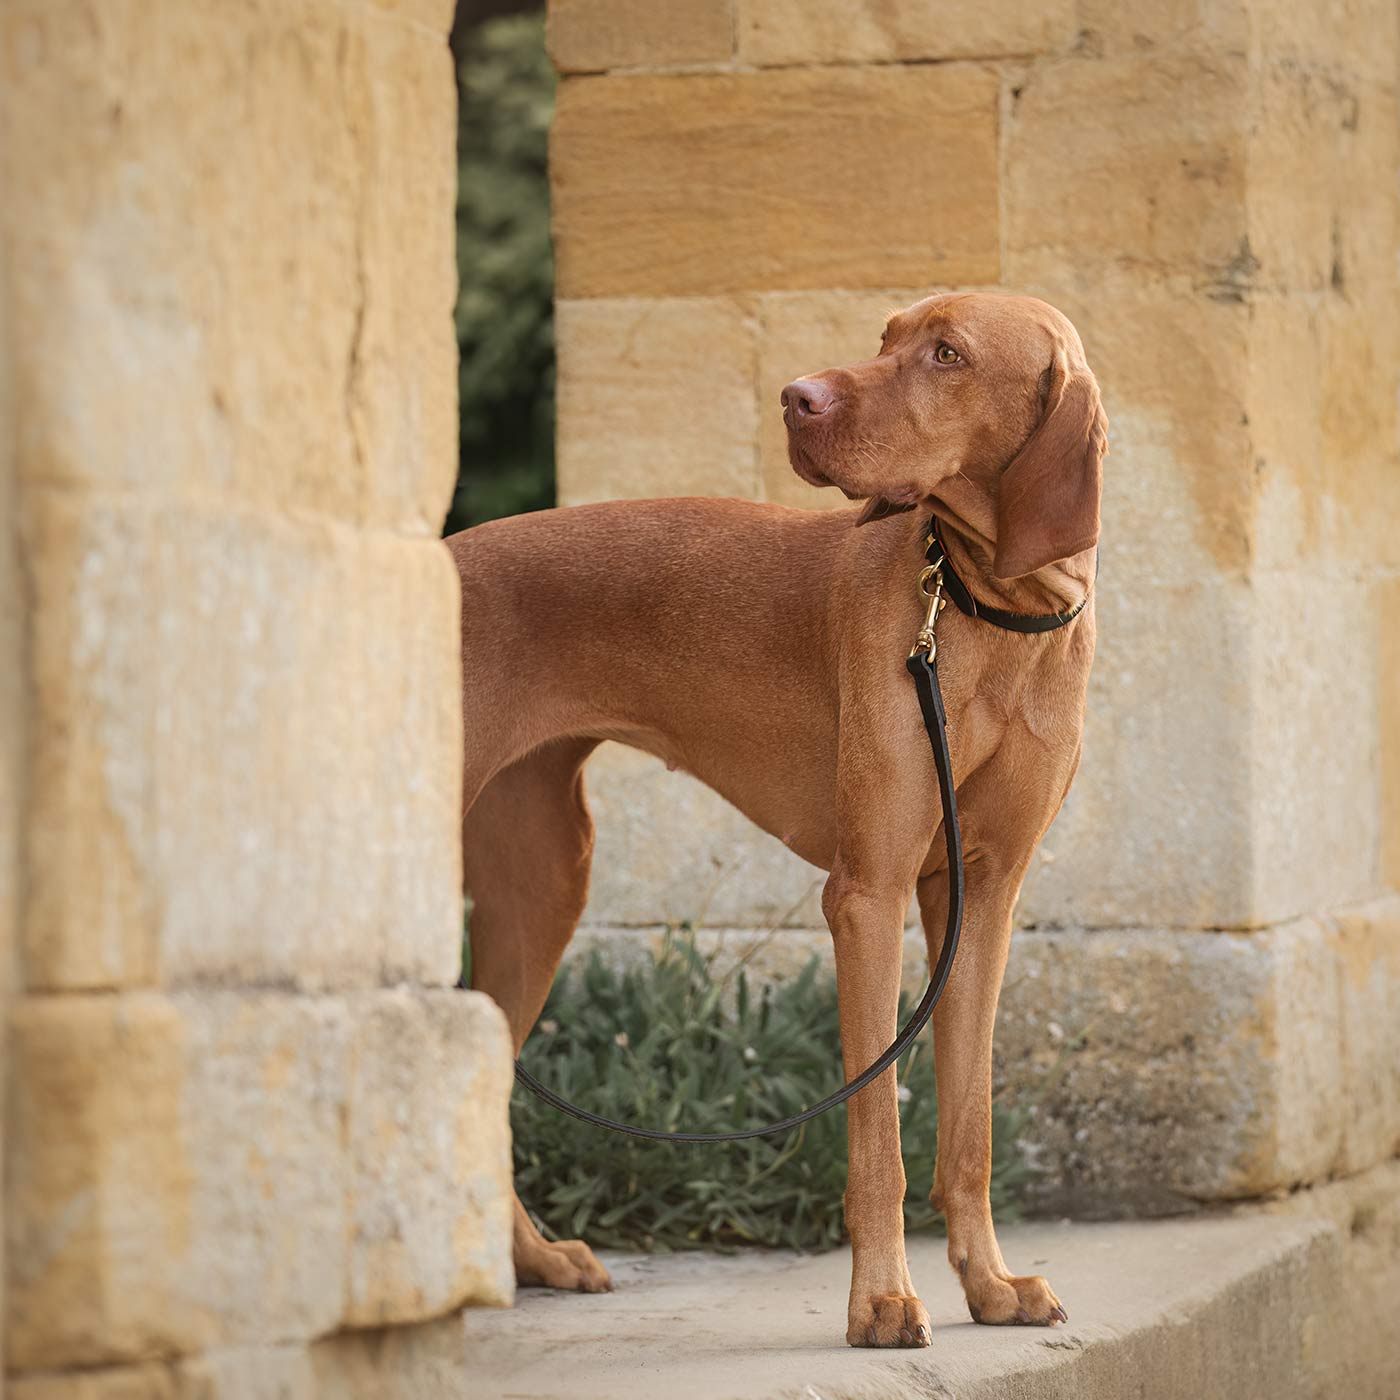 Discover dog walking luxury with our handcrafted Italian real leather, embossed with an Ostrich inspired print for the ultimate luxurious look, Dog Collar in Black & Orange! The perfect Collar for dogs available now at Lords & Labradors US